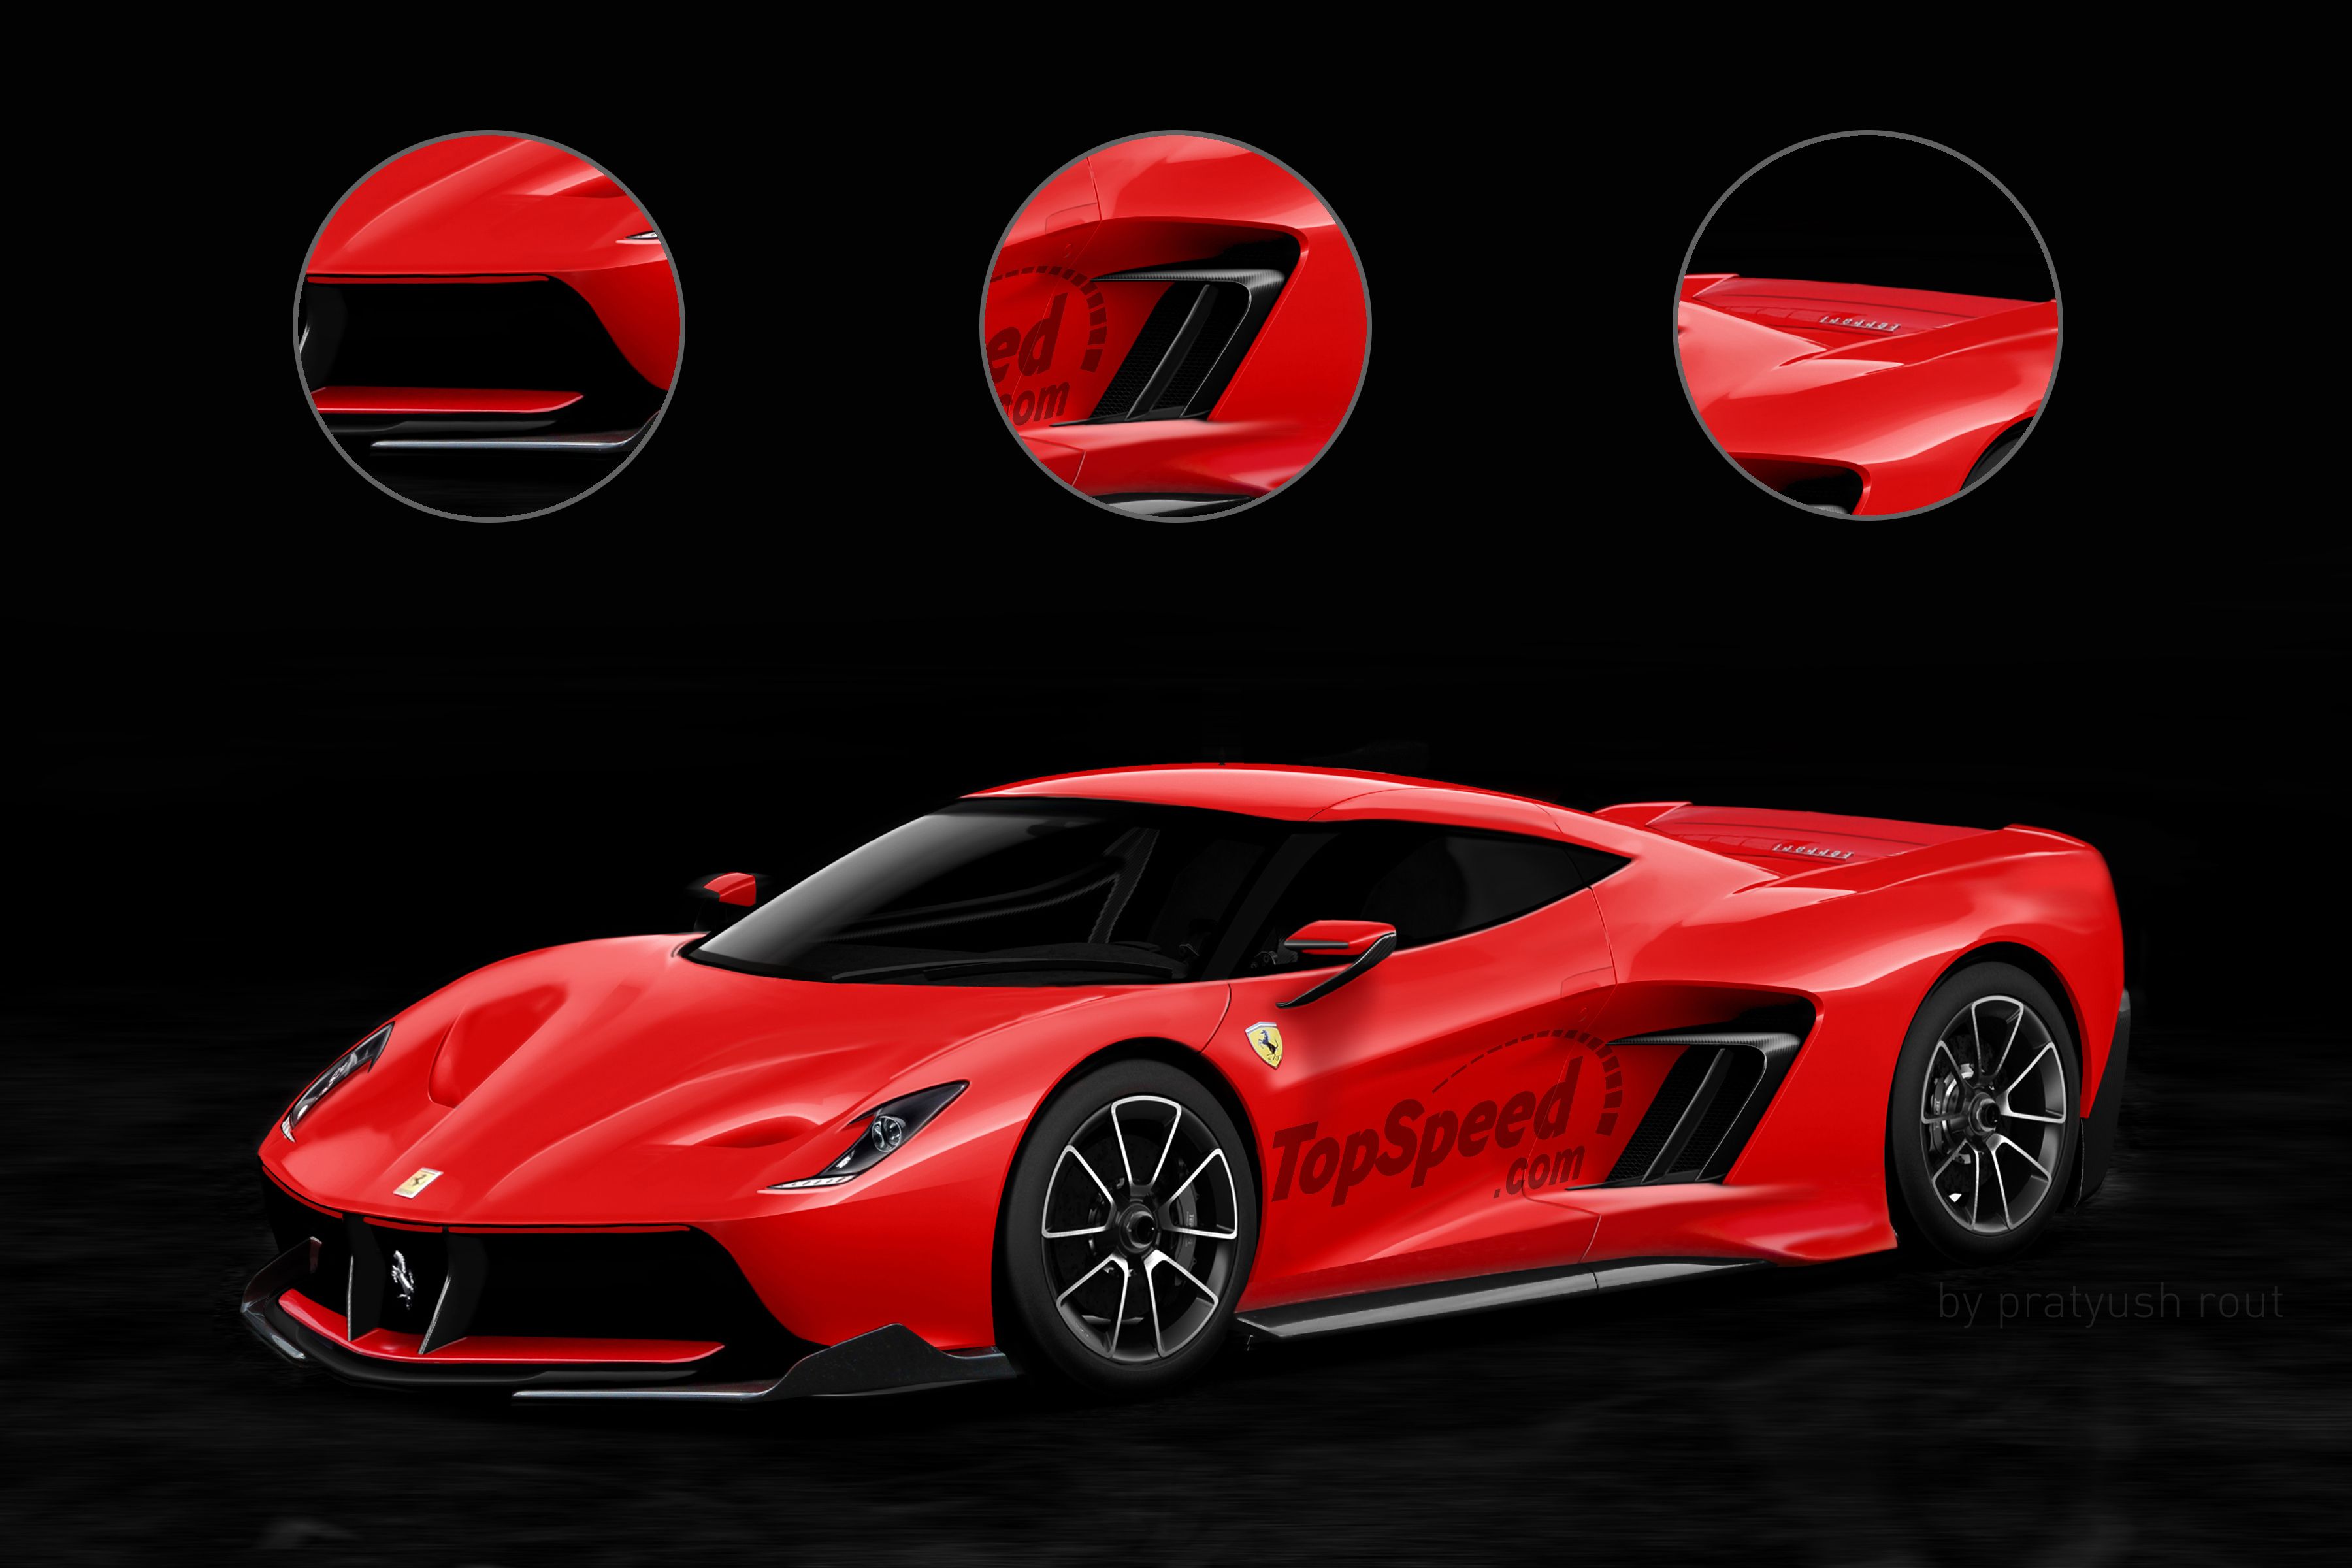 2021 We Can Confirm That Ferrari Is Working on a New Hybrid (Maybe) V-12 Halo Car